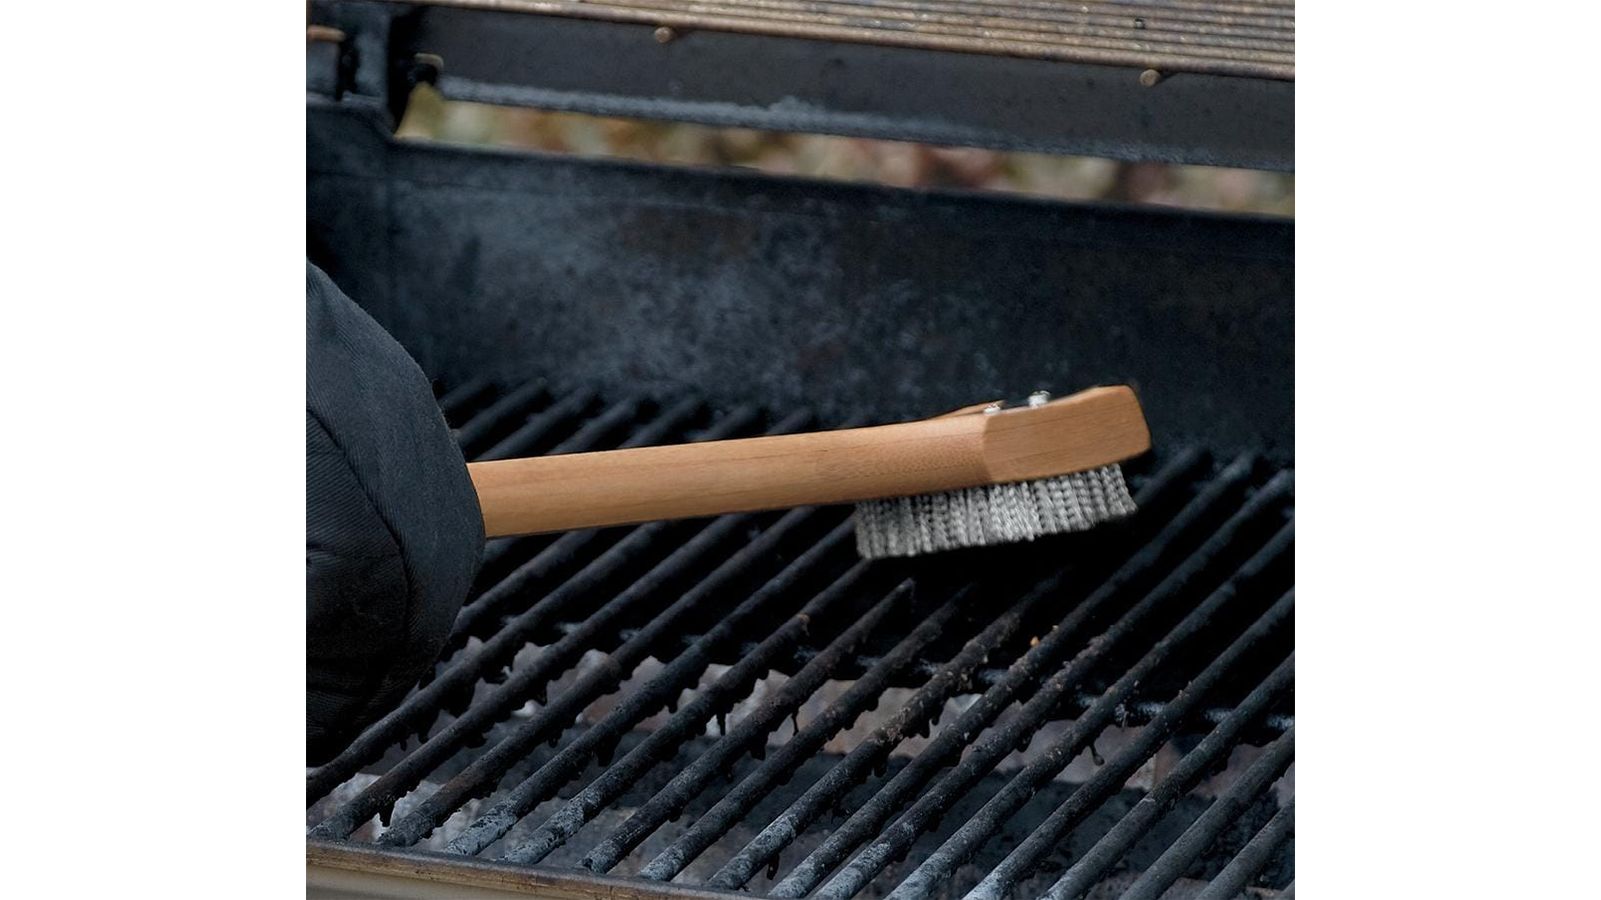 The Best Grill Brushes, According to an Expert